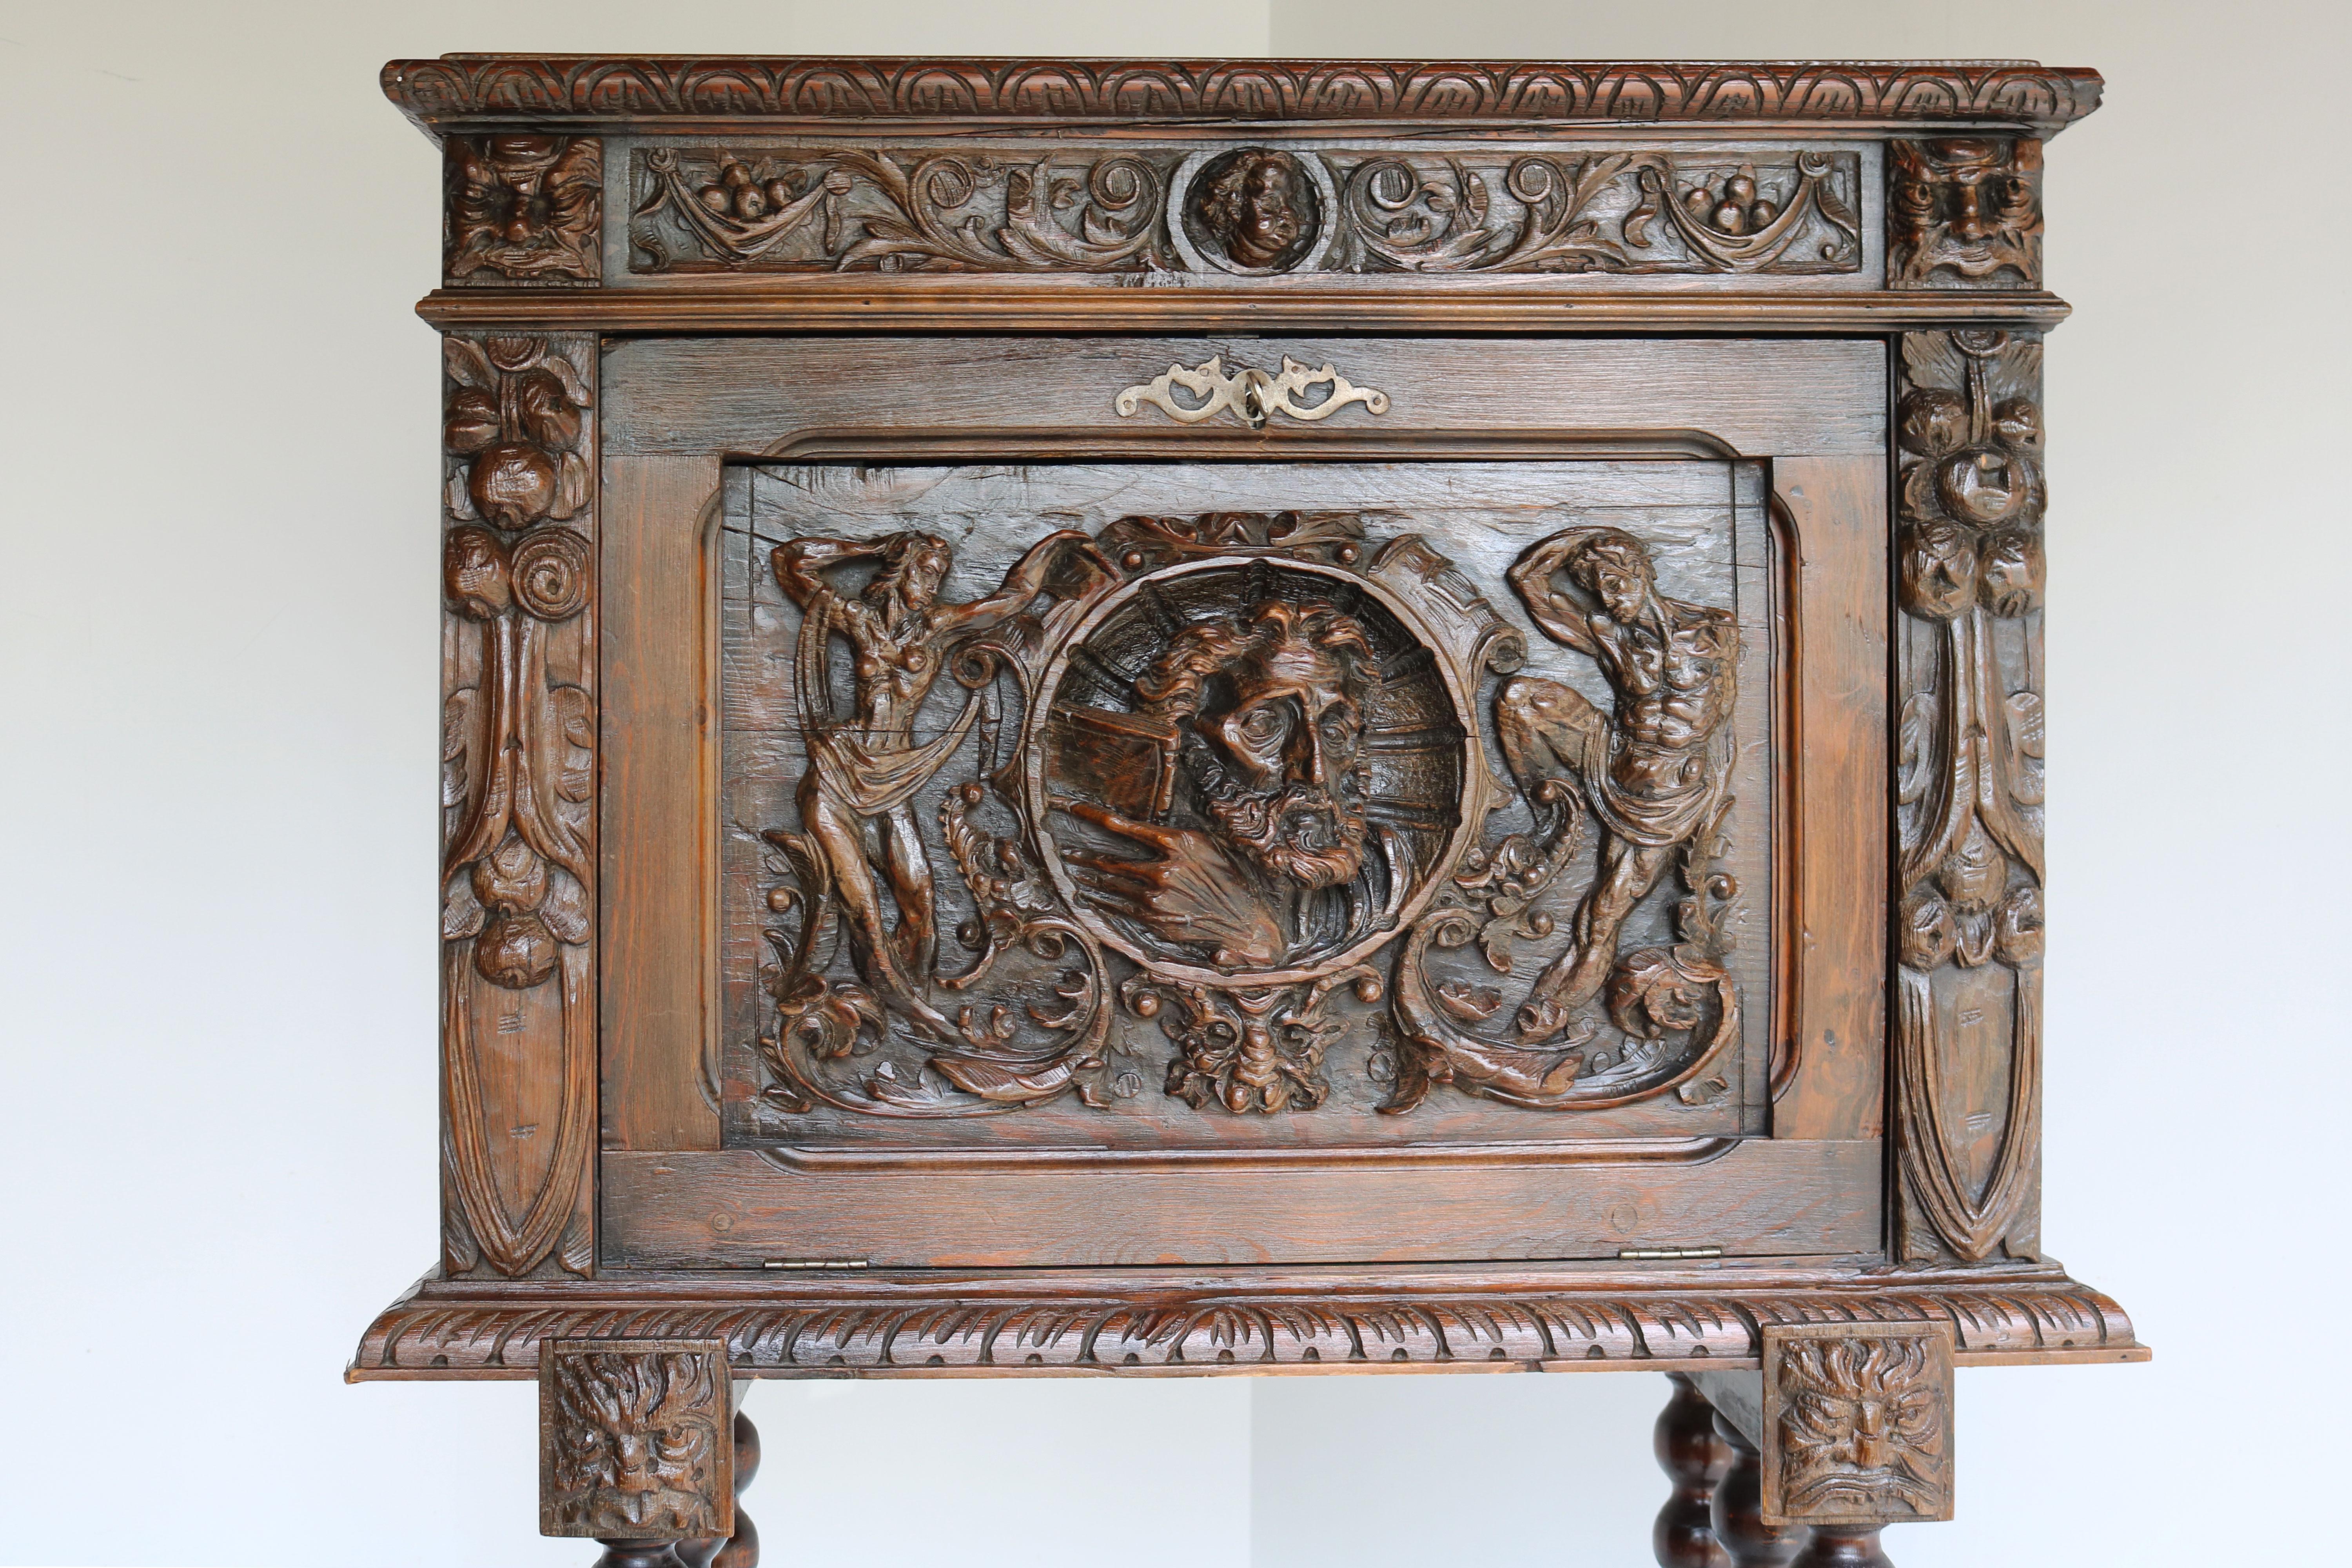 Exquisite Spanish Bargueño cabinet from late 19th century Renaissance style , Richly carved with wrought iron grips on the side & bobbin legs. 
Amazing details & craftsmanship in a most impressive design style. The cabinet is filled with details